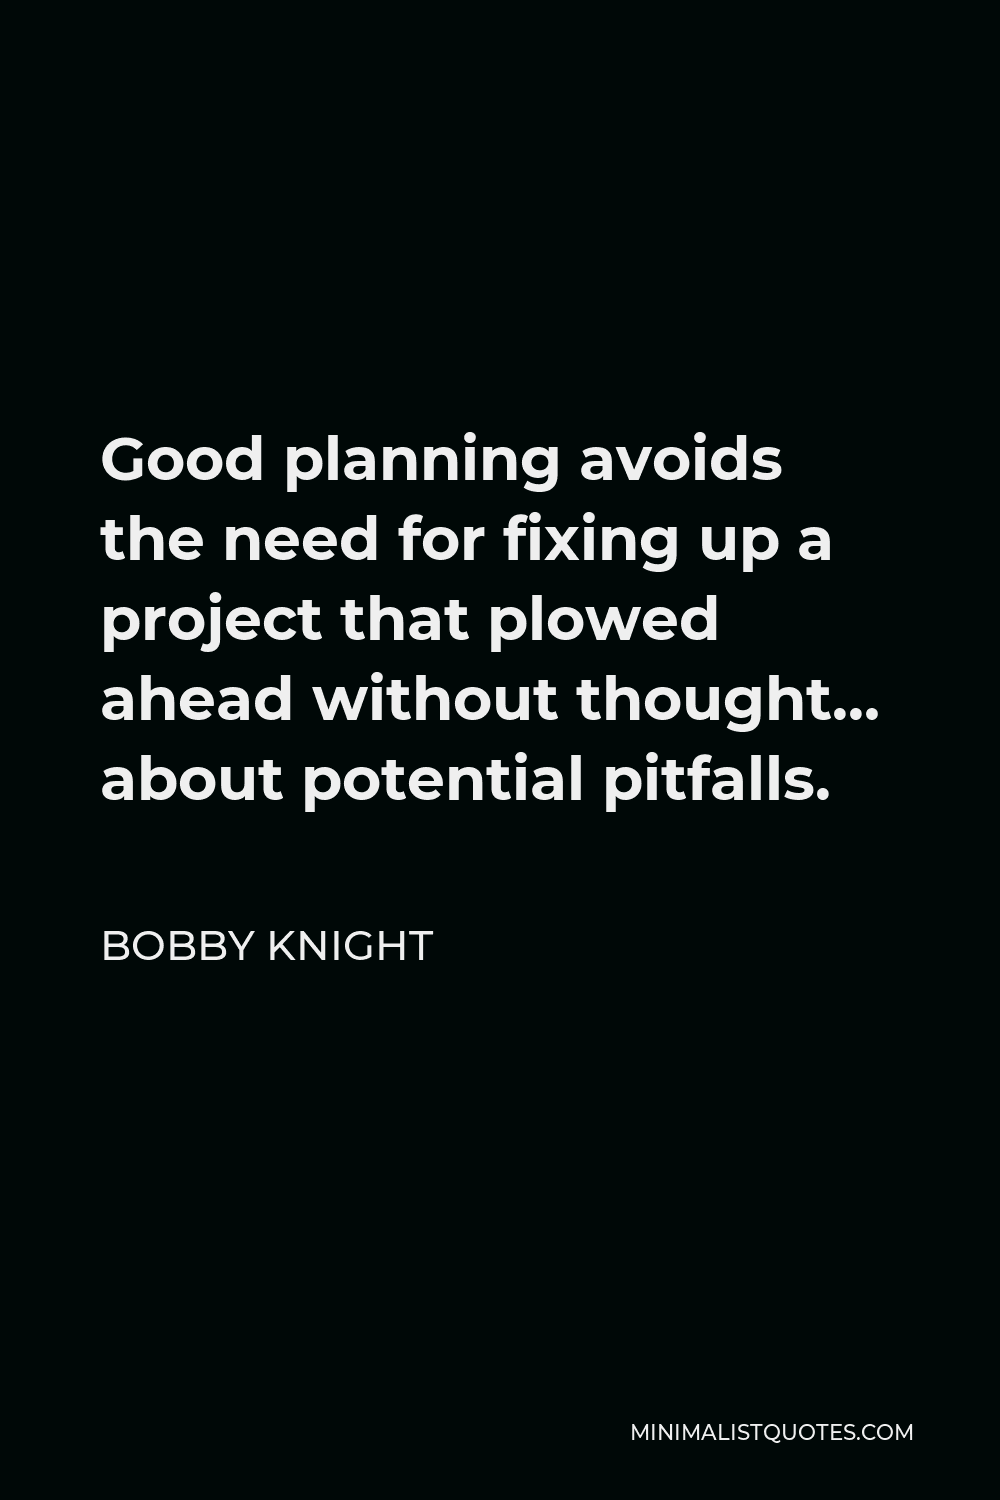 Bobby Knight Quote - Good planning avoids the need for fixing up a project that plowed ahead without thought… about potential pitfalls.